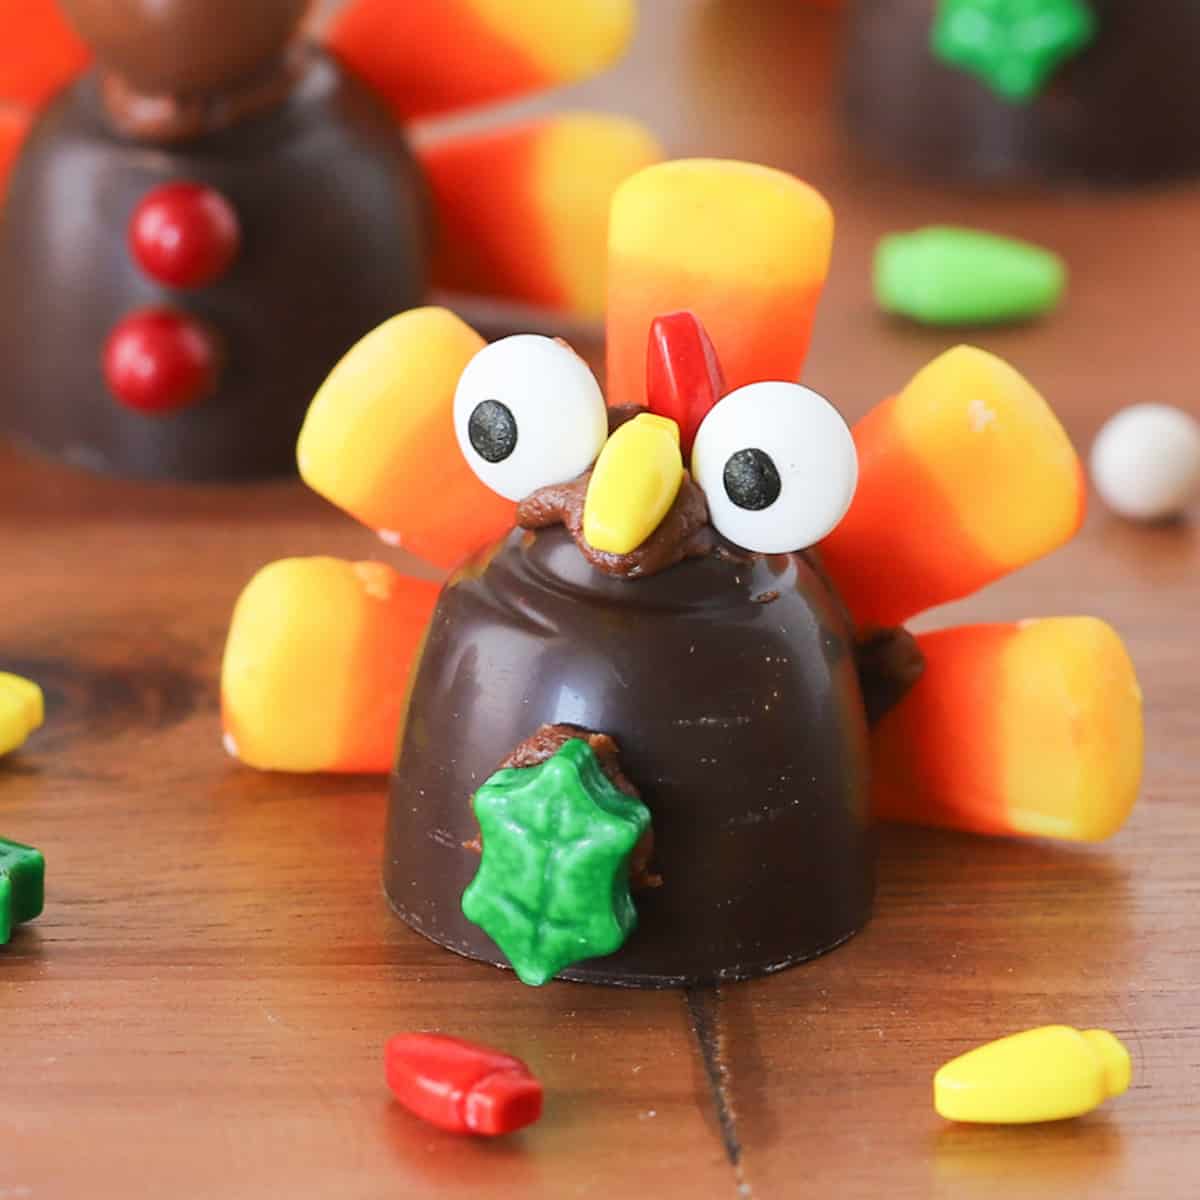 chocolate turkeys for thanksgivingwith candy corns for thanksgiving,